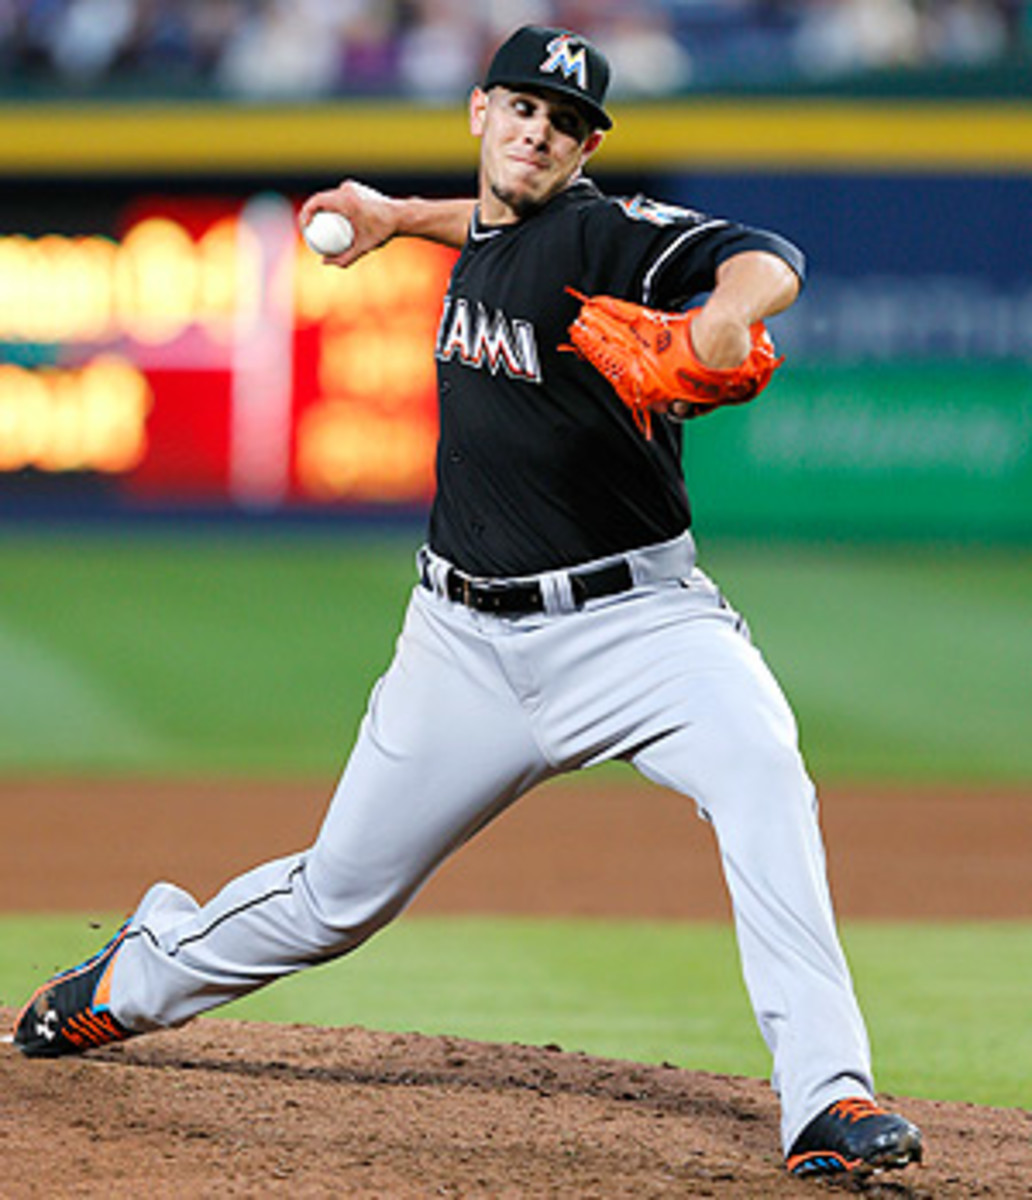 Jose Fernandez pitched lights-out against the Braves, striking out 14 and giving up no runs in eight innings.